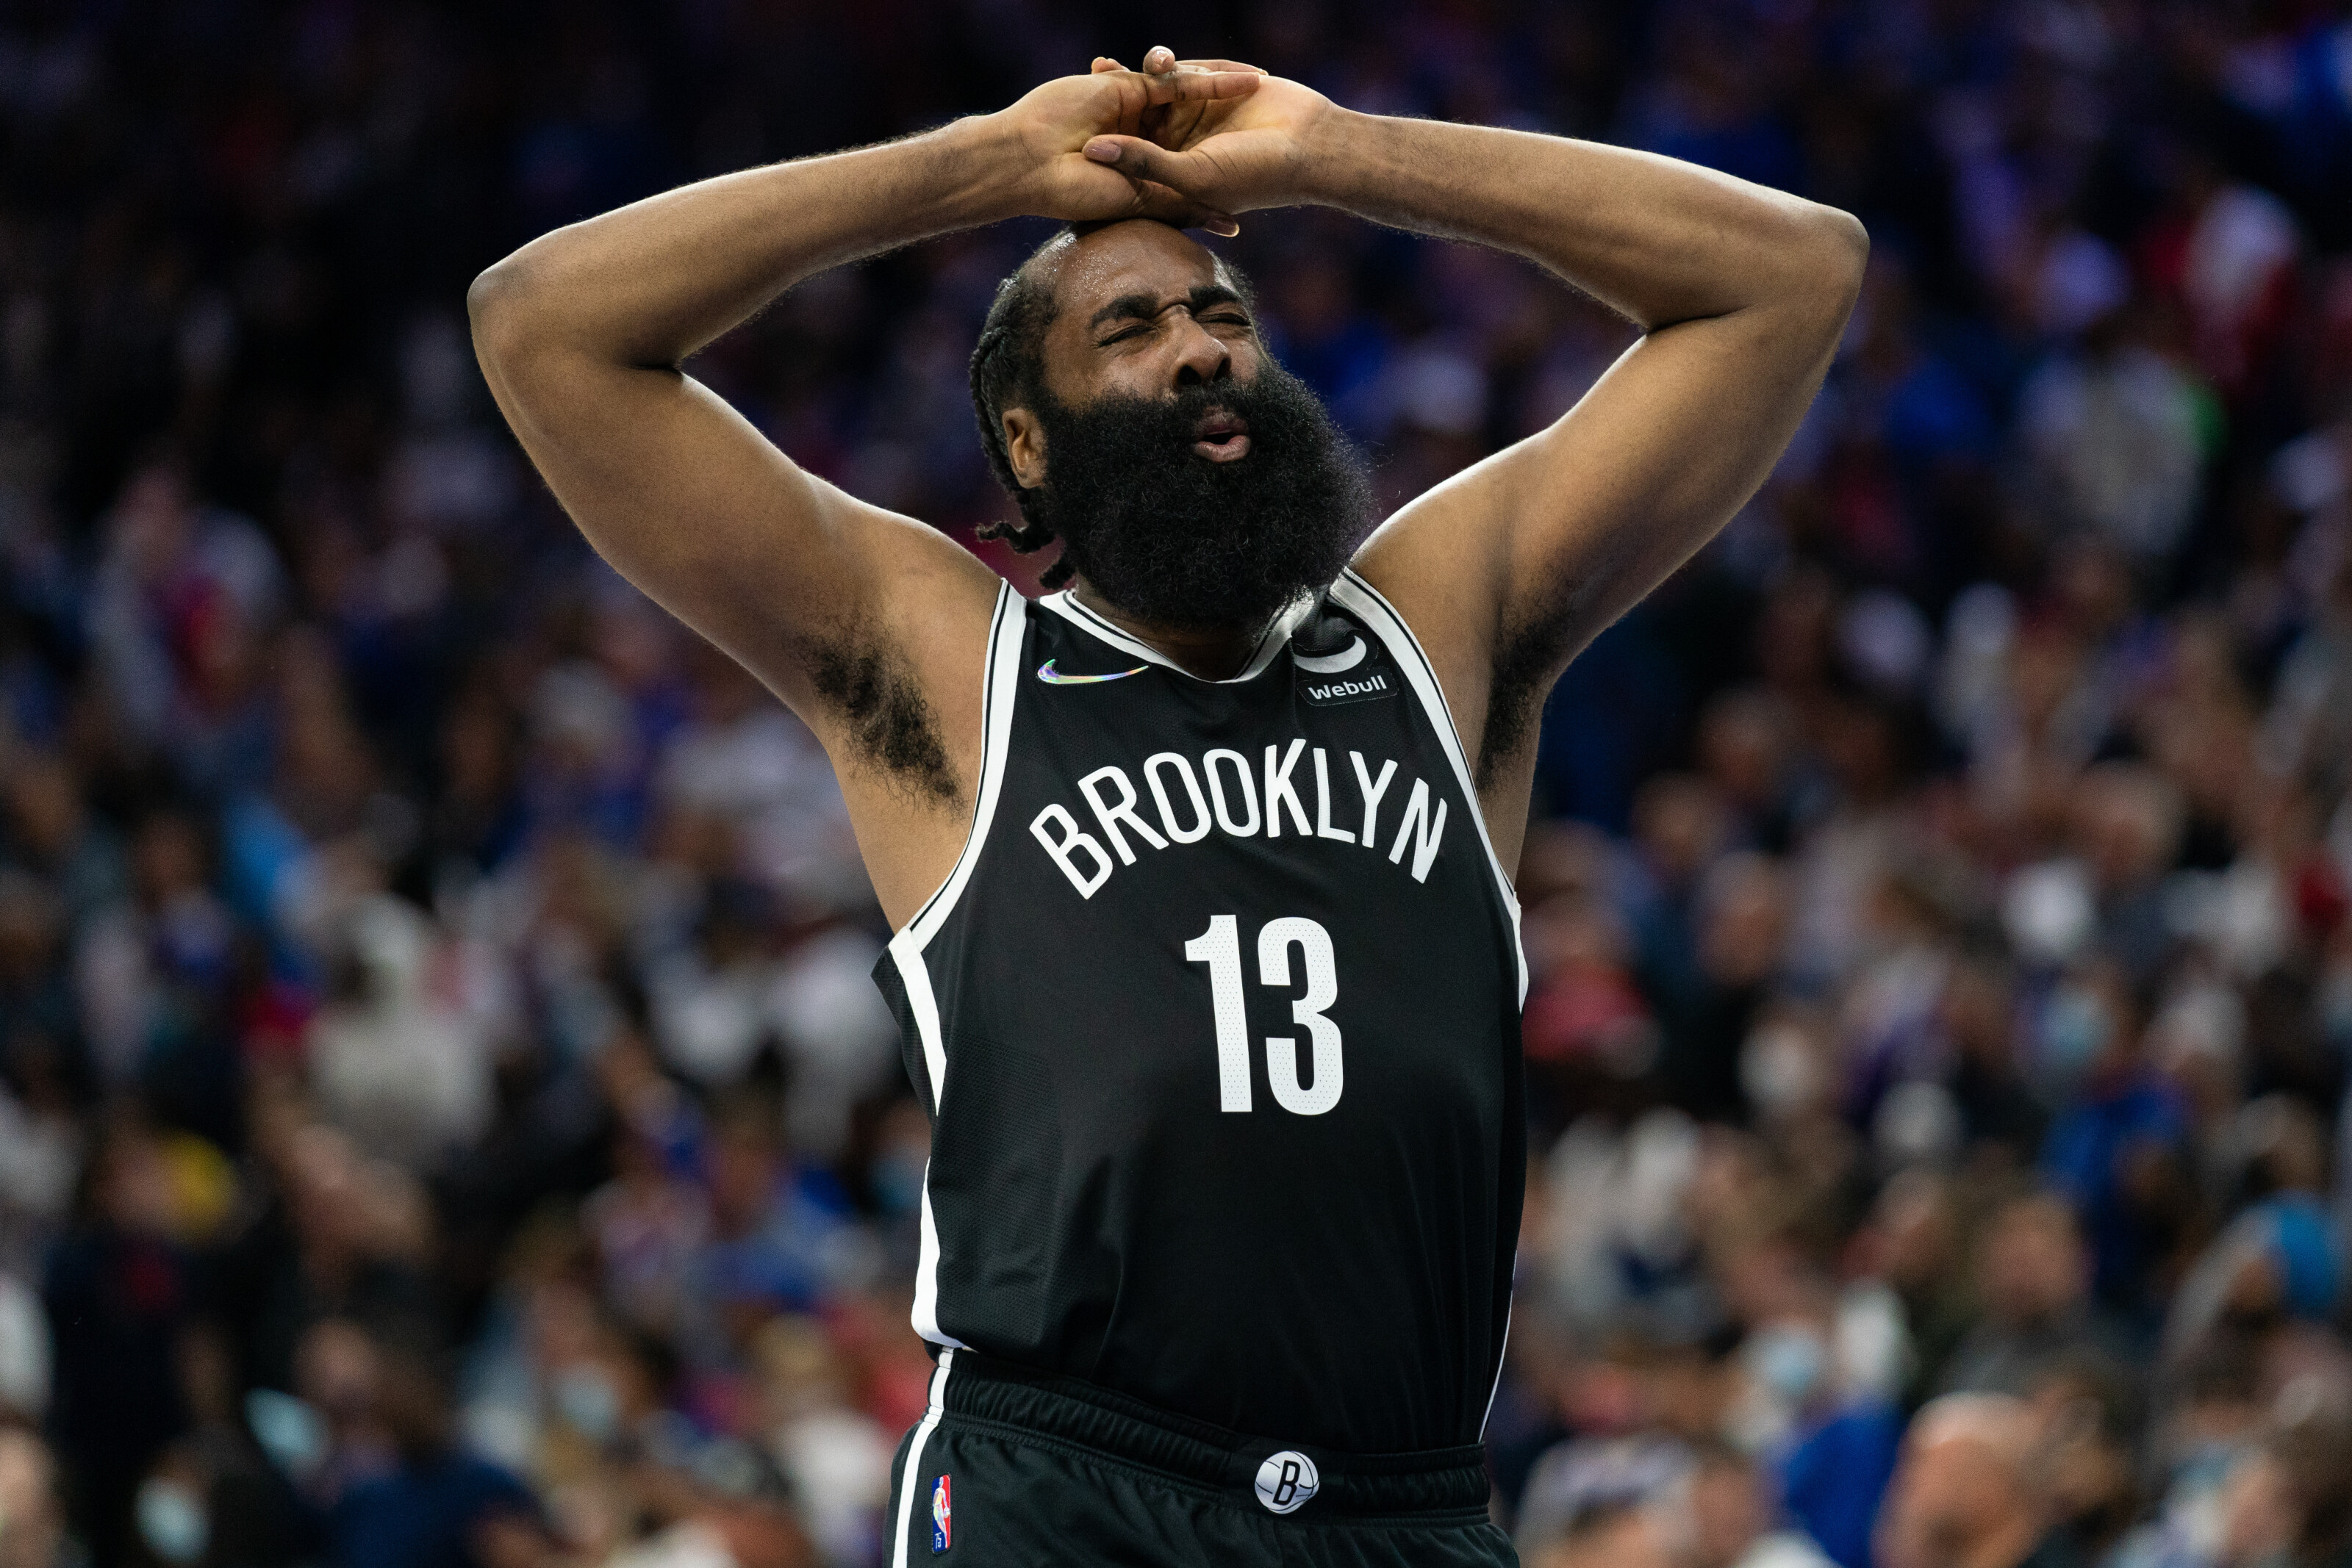 Brooklyn Nets: Patty Mills is absolutely torching everyone to